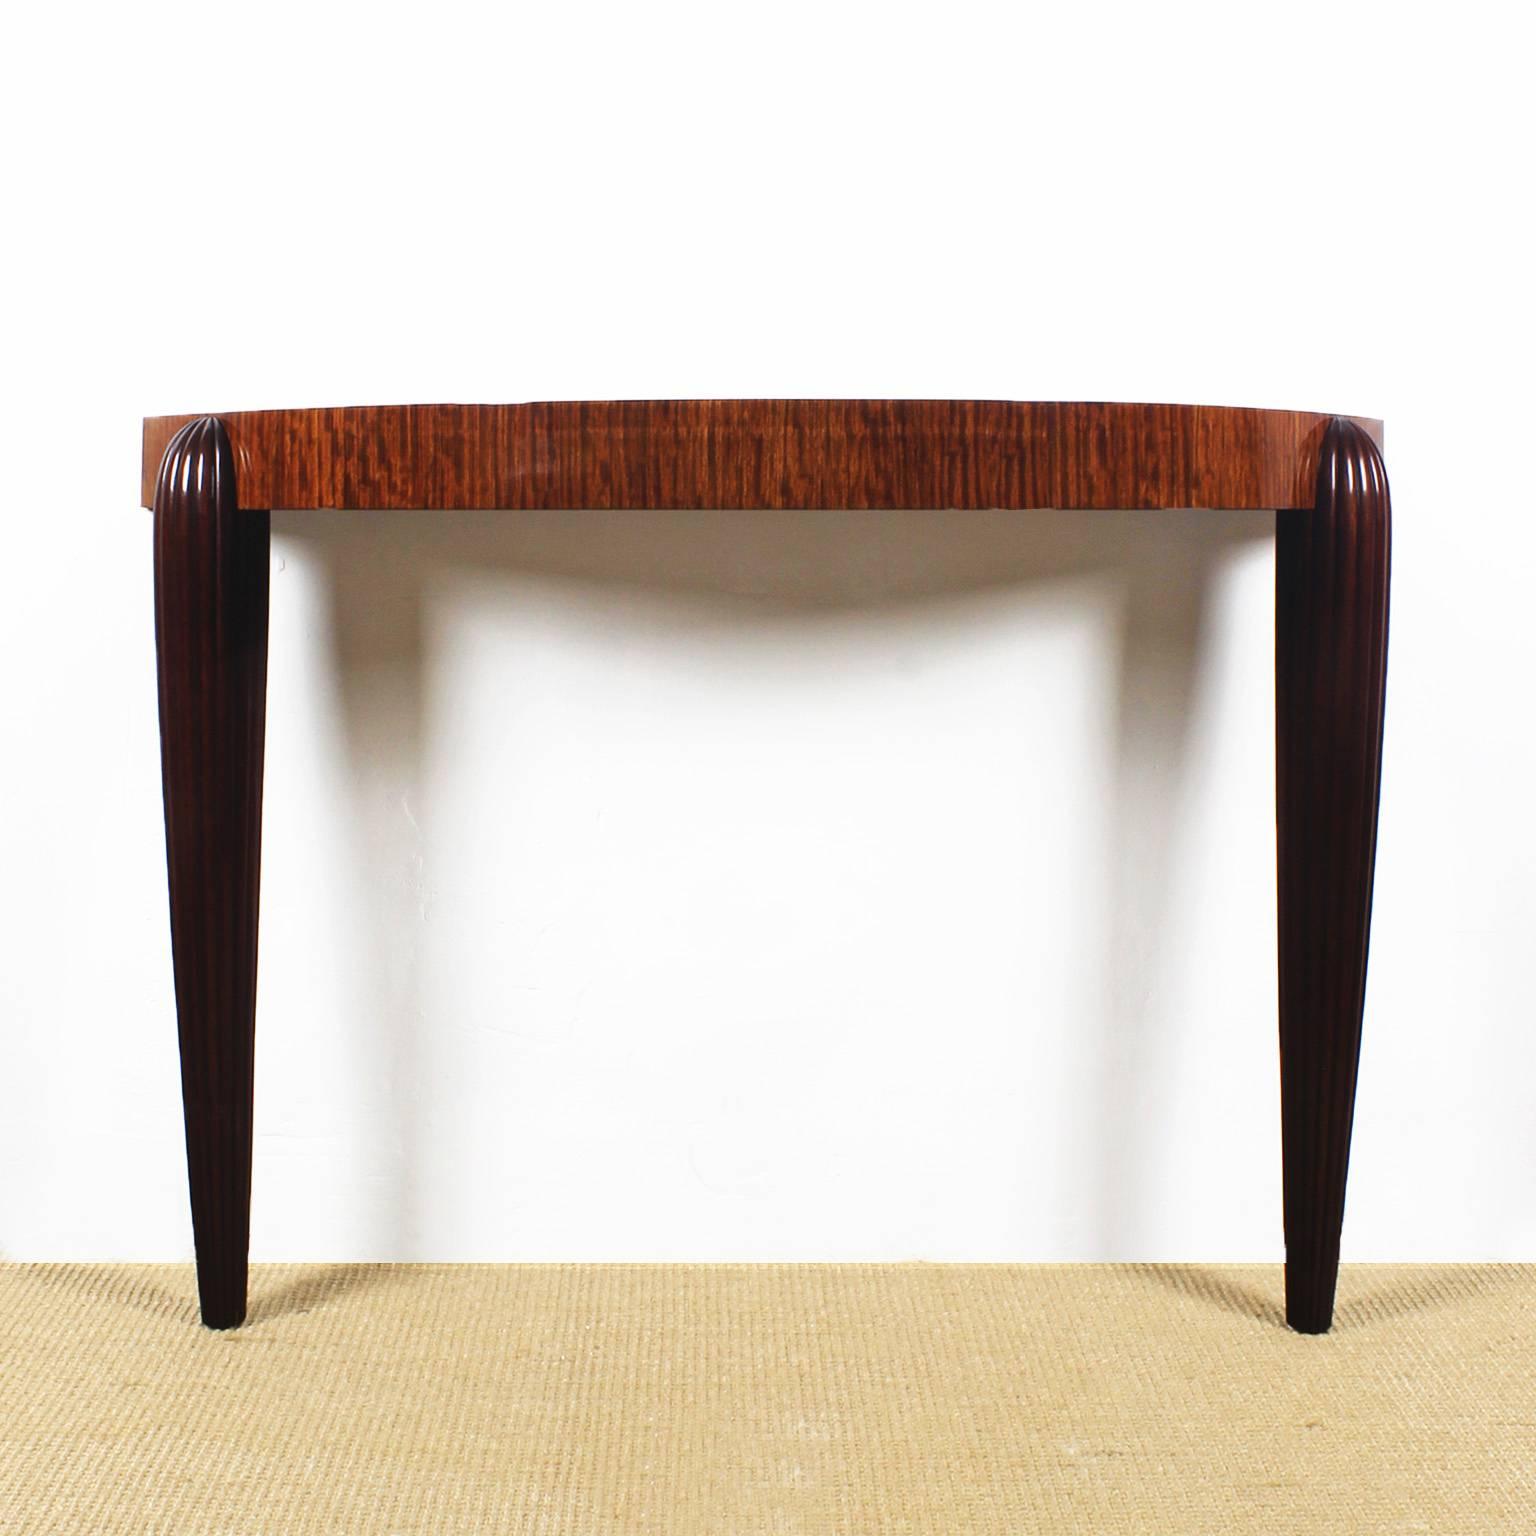 Art Deco console, grooved solid mahogany legs, rosewood veneer on top with a sycamore marquetry, French polish.

France, circa 1925.